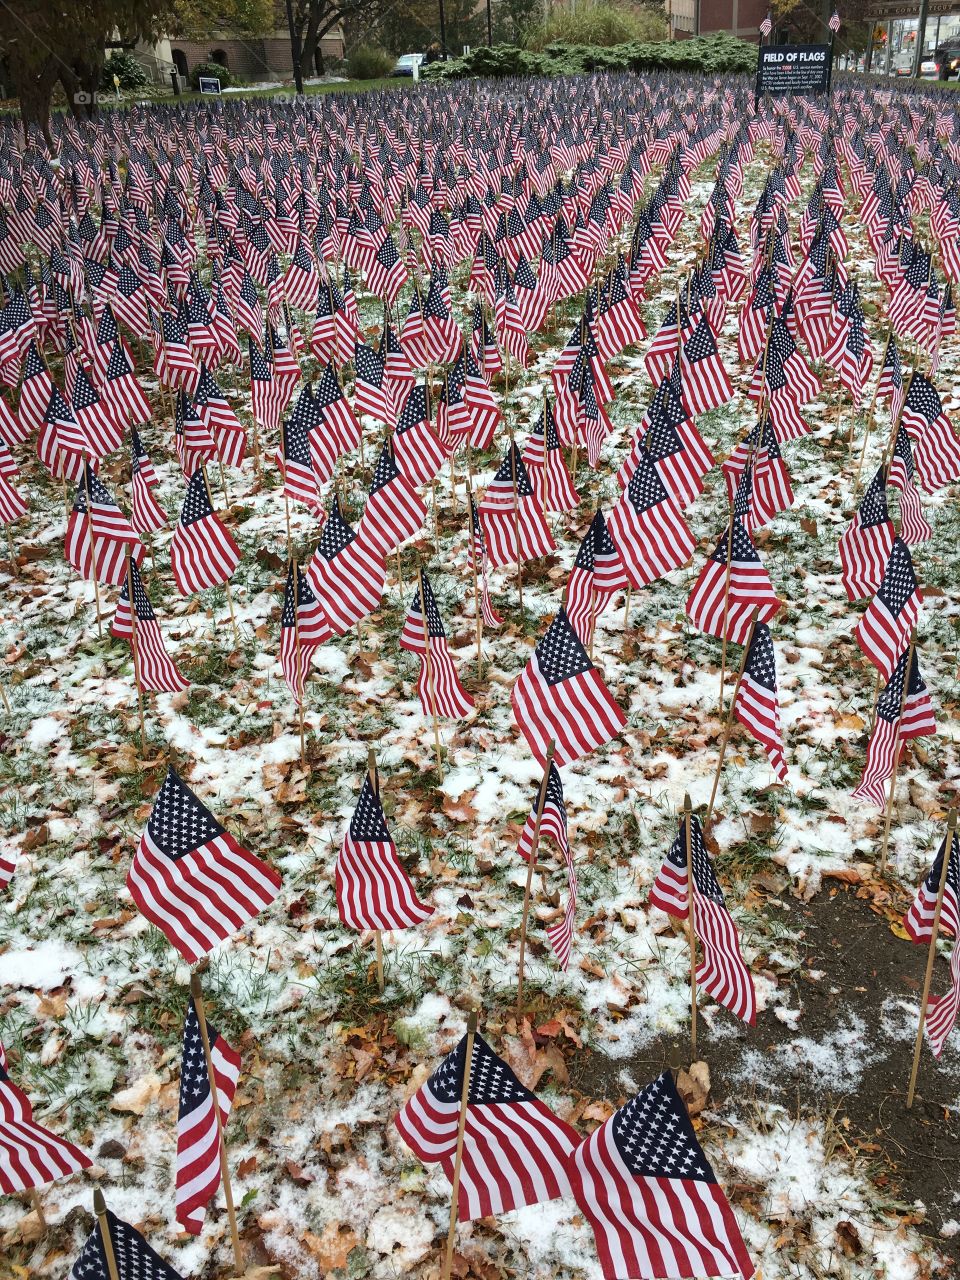 Field of flags in the snow